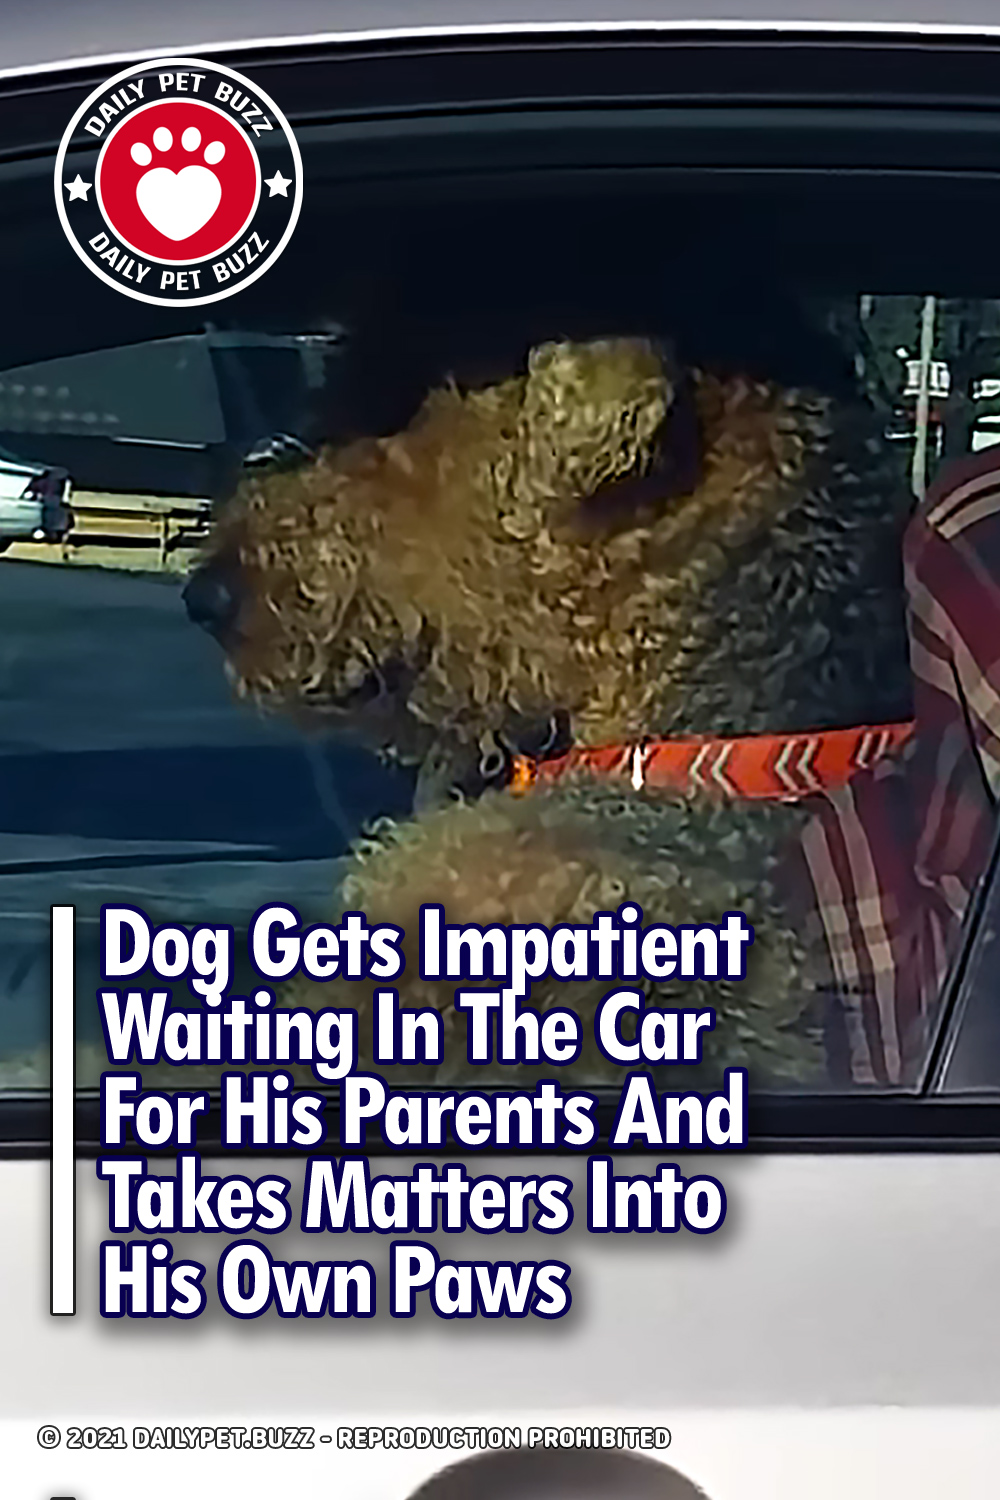 Dog Gets Impatient Waiting In The Car For His Parents And Takes Matters Into His Own Paws